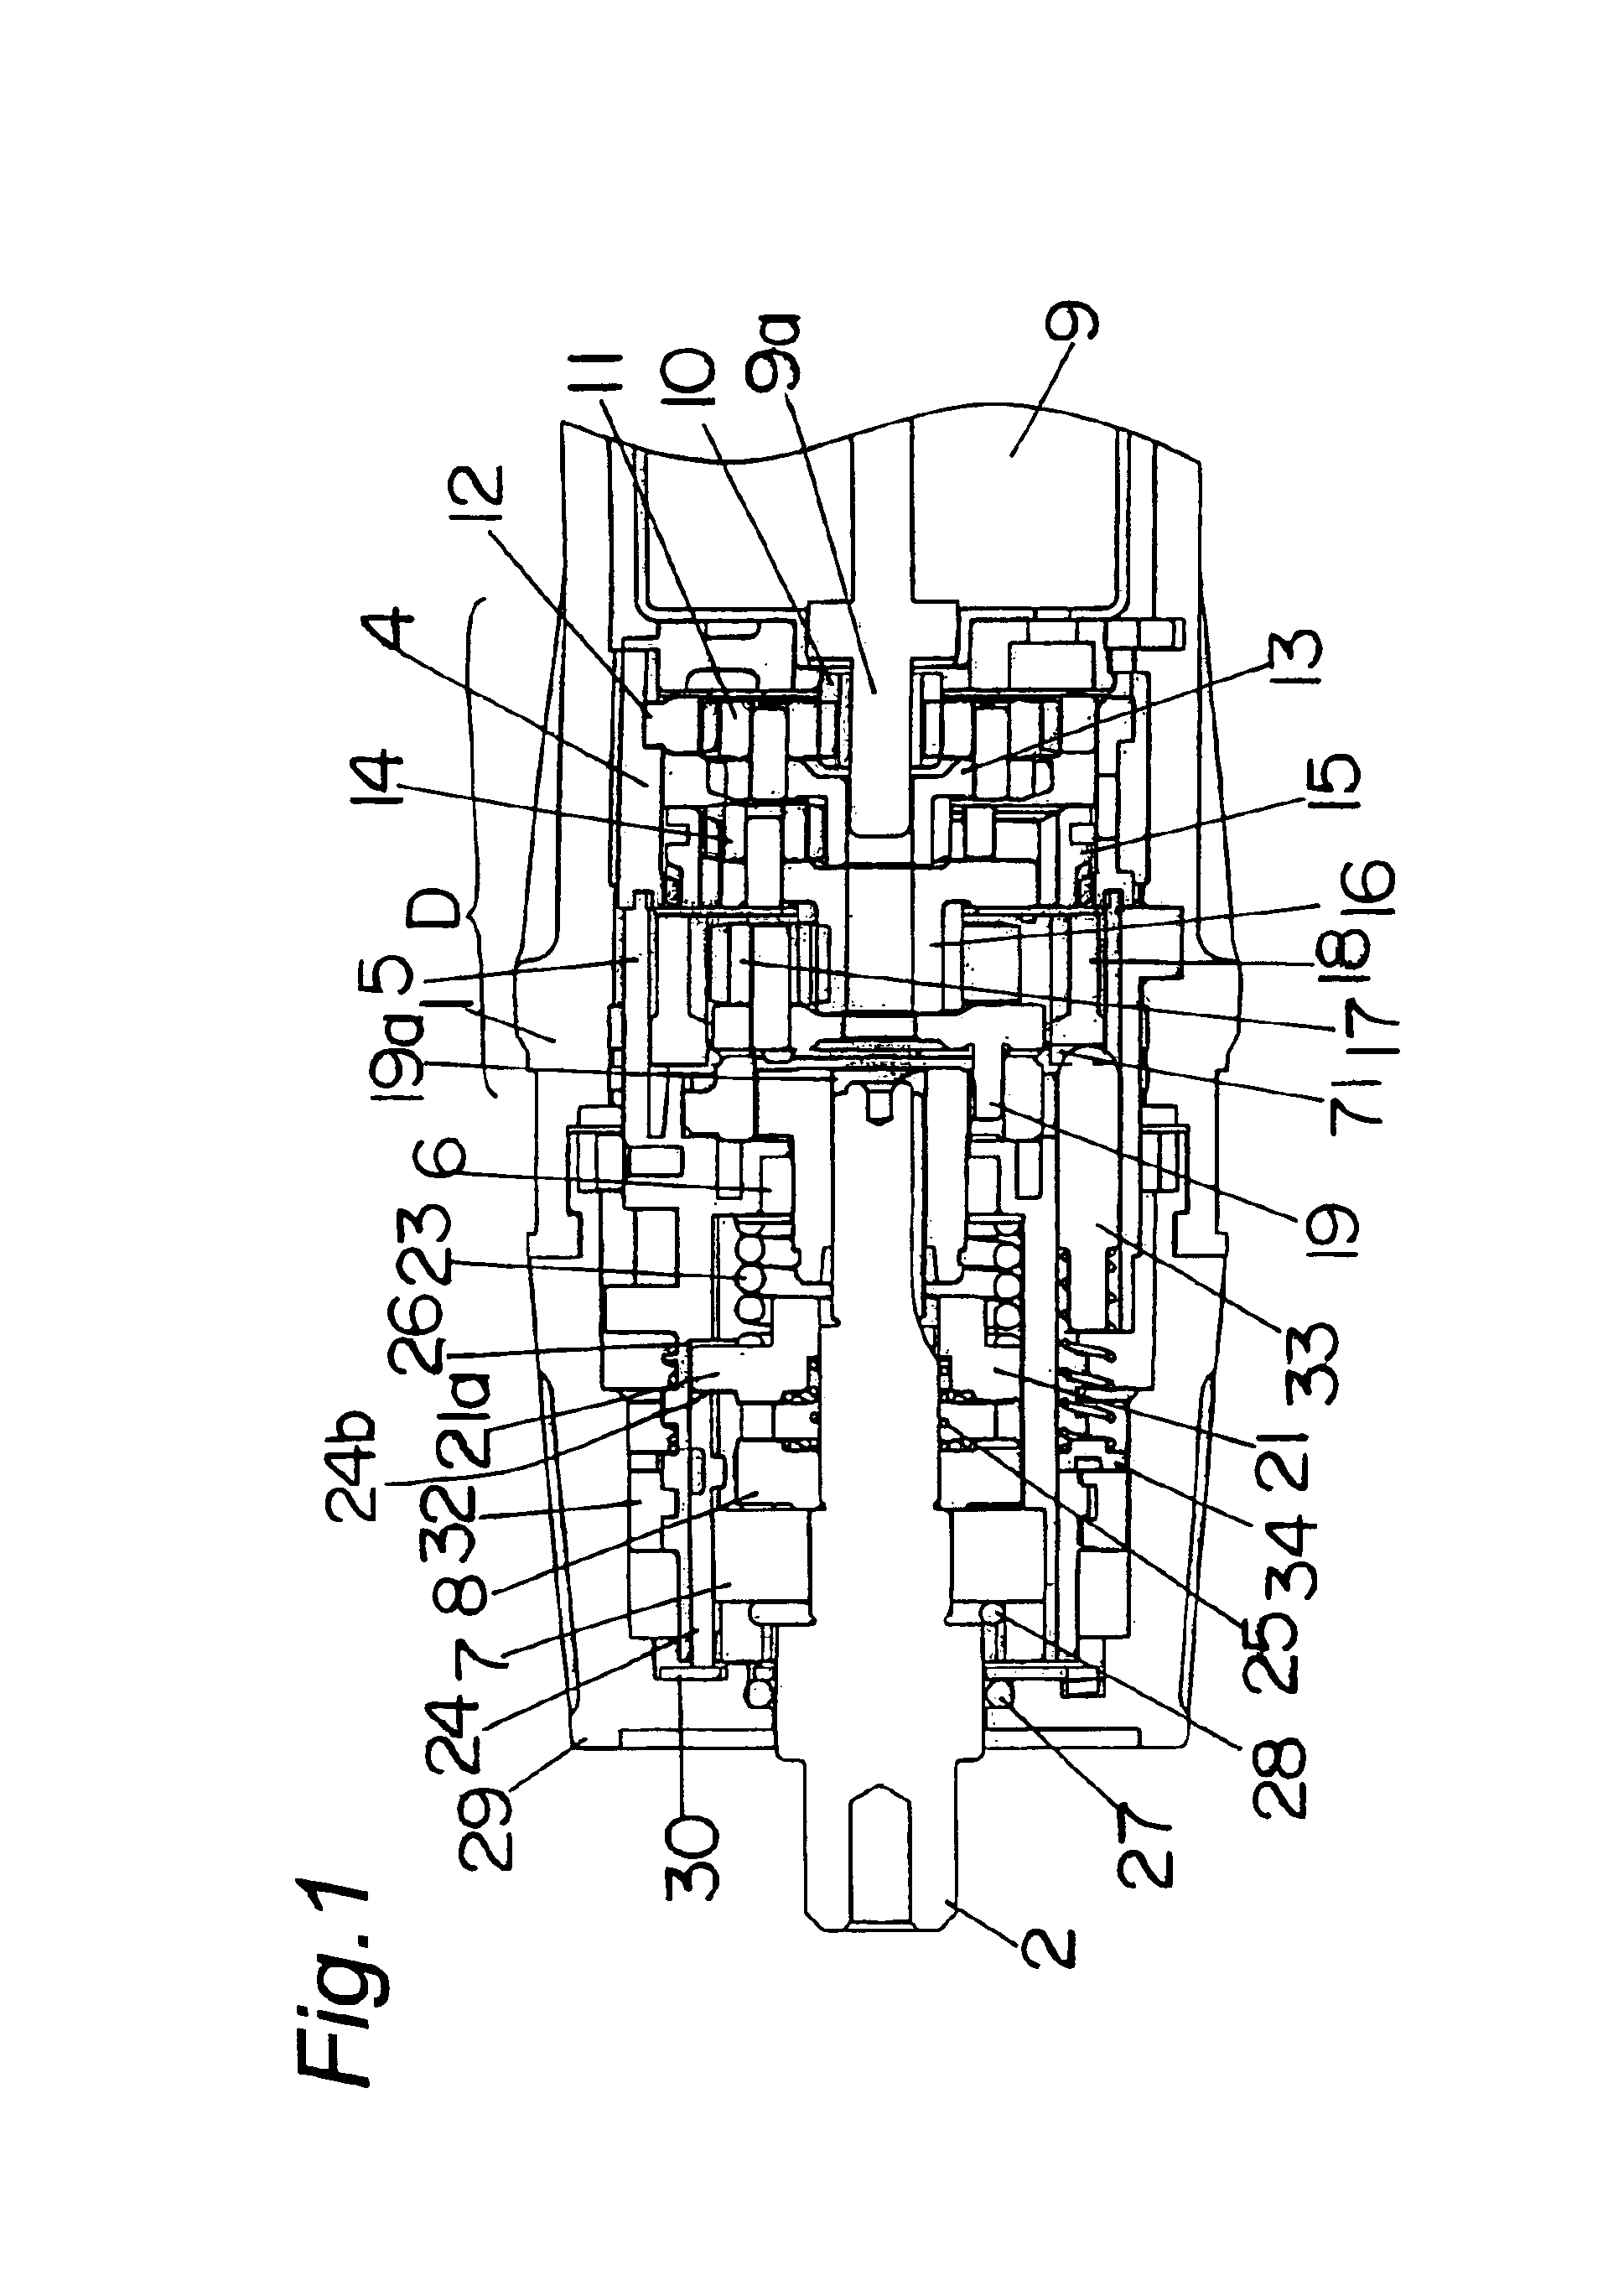 Electrically operated vibrating drill/driver